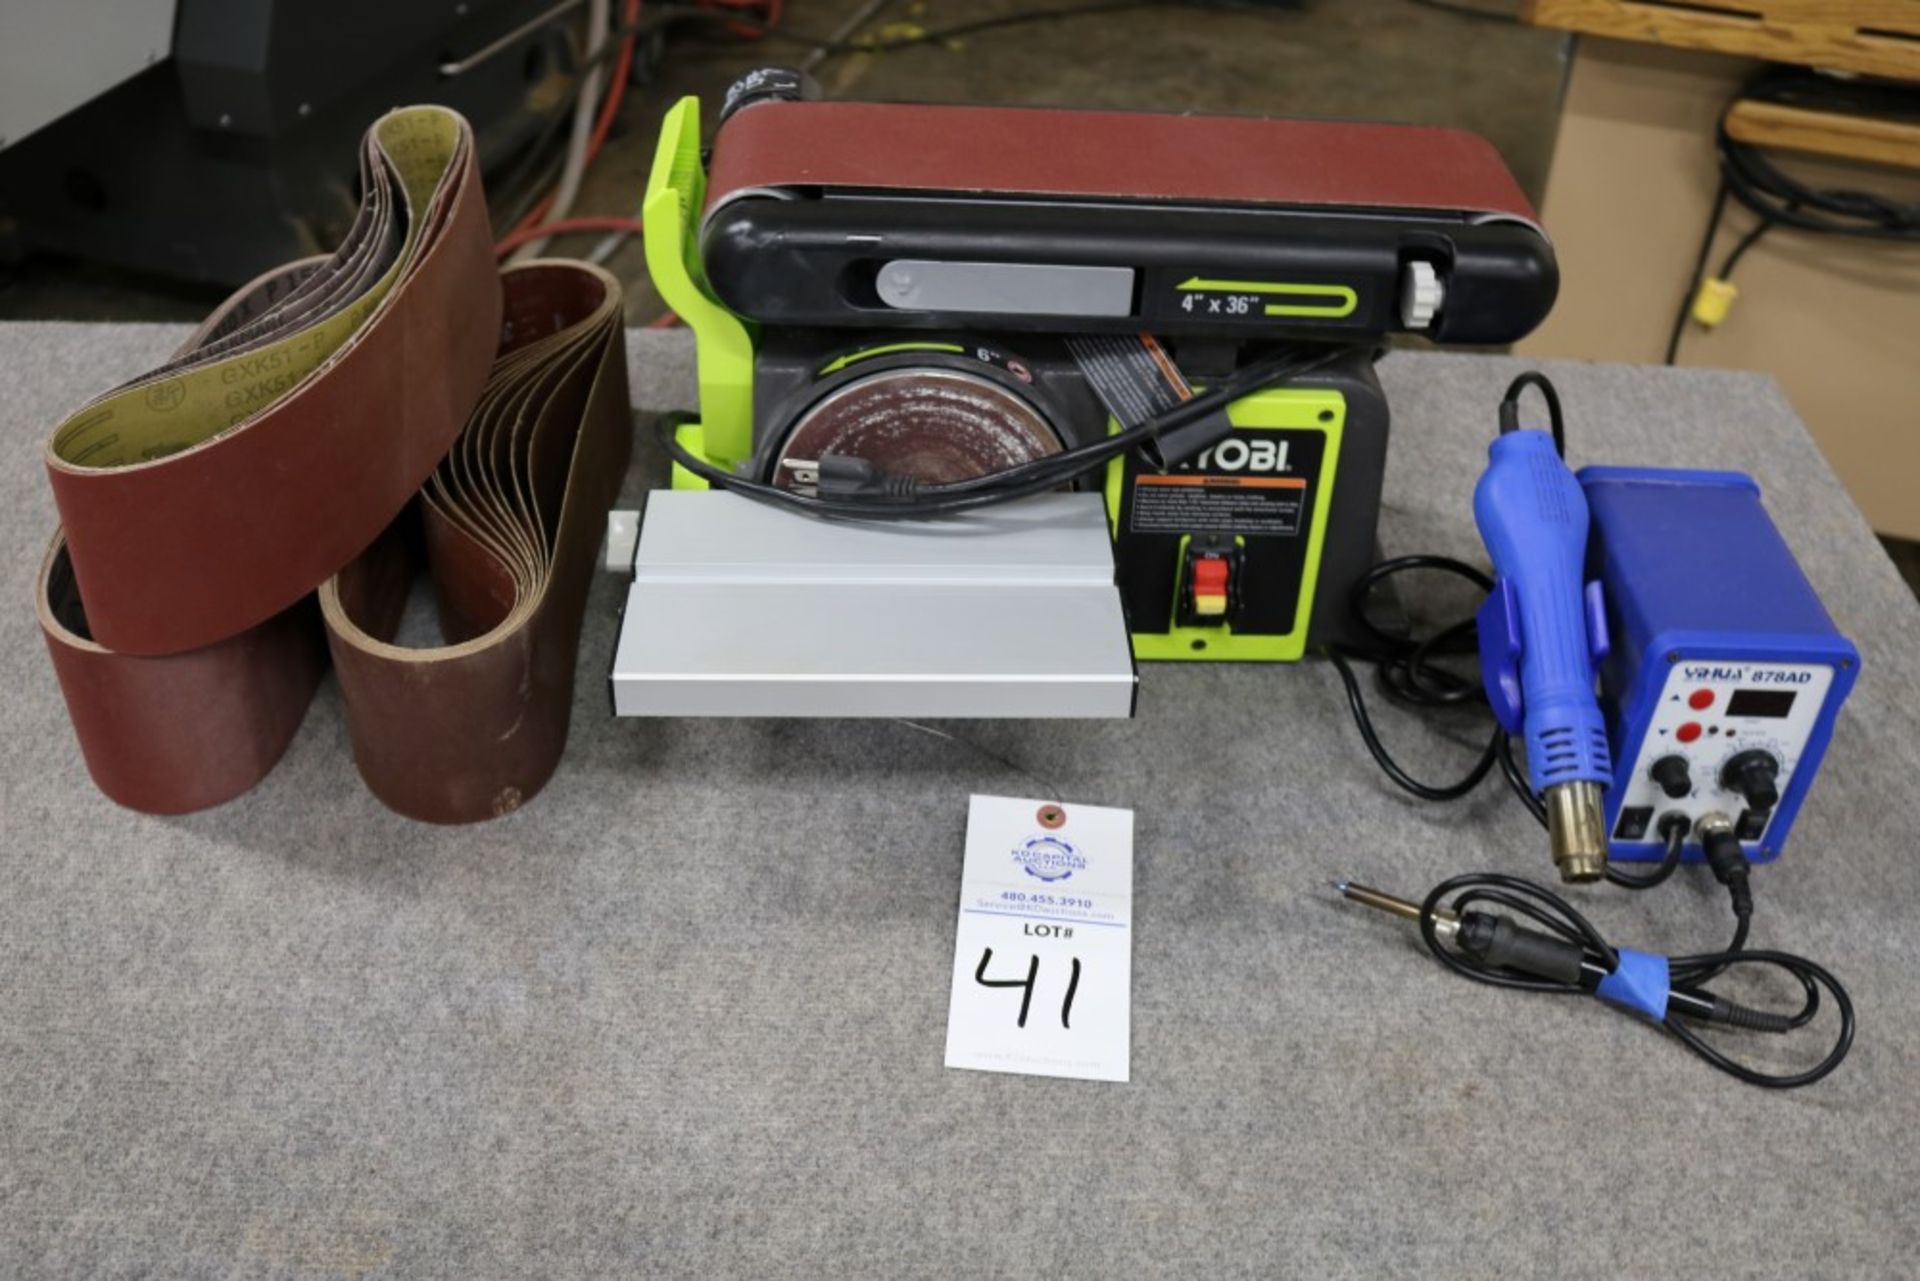 Ryobi 4" x 6" Belt and Disc Sander with Extra New Sanding Belts, also YiHua 878 AD- SMD ReWork - Image 7 of 9